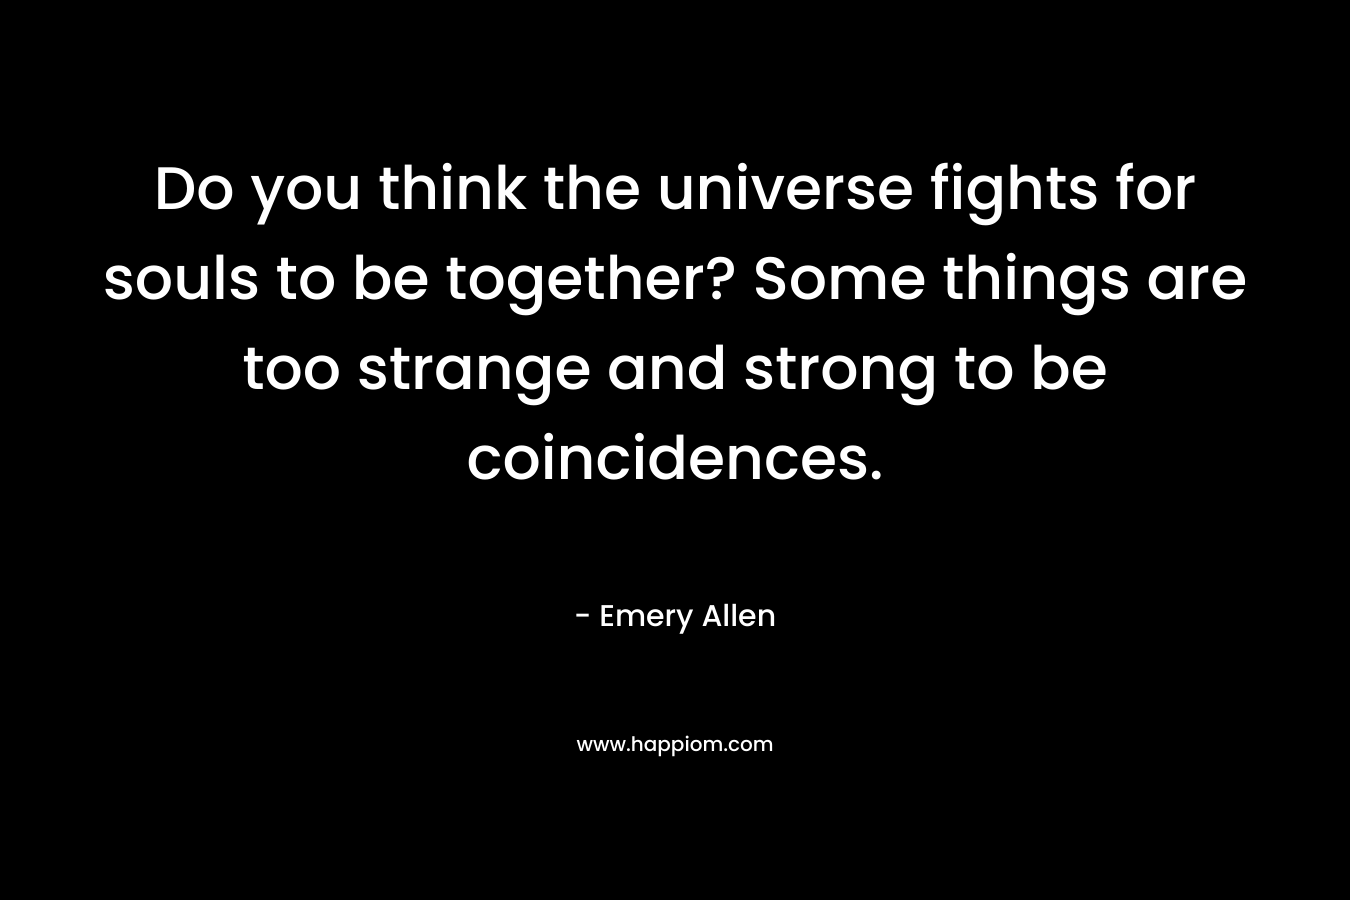 Do you think the universe fights for souls to be together? Some things are too strange and strong to be coincidences.